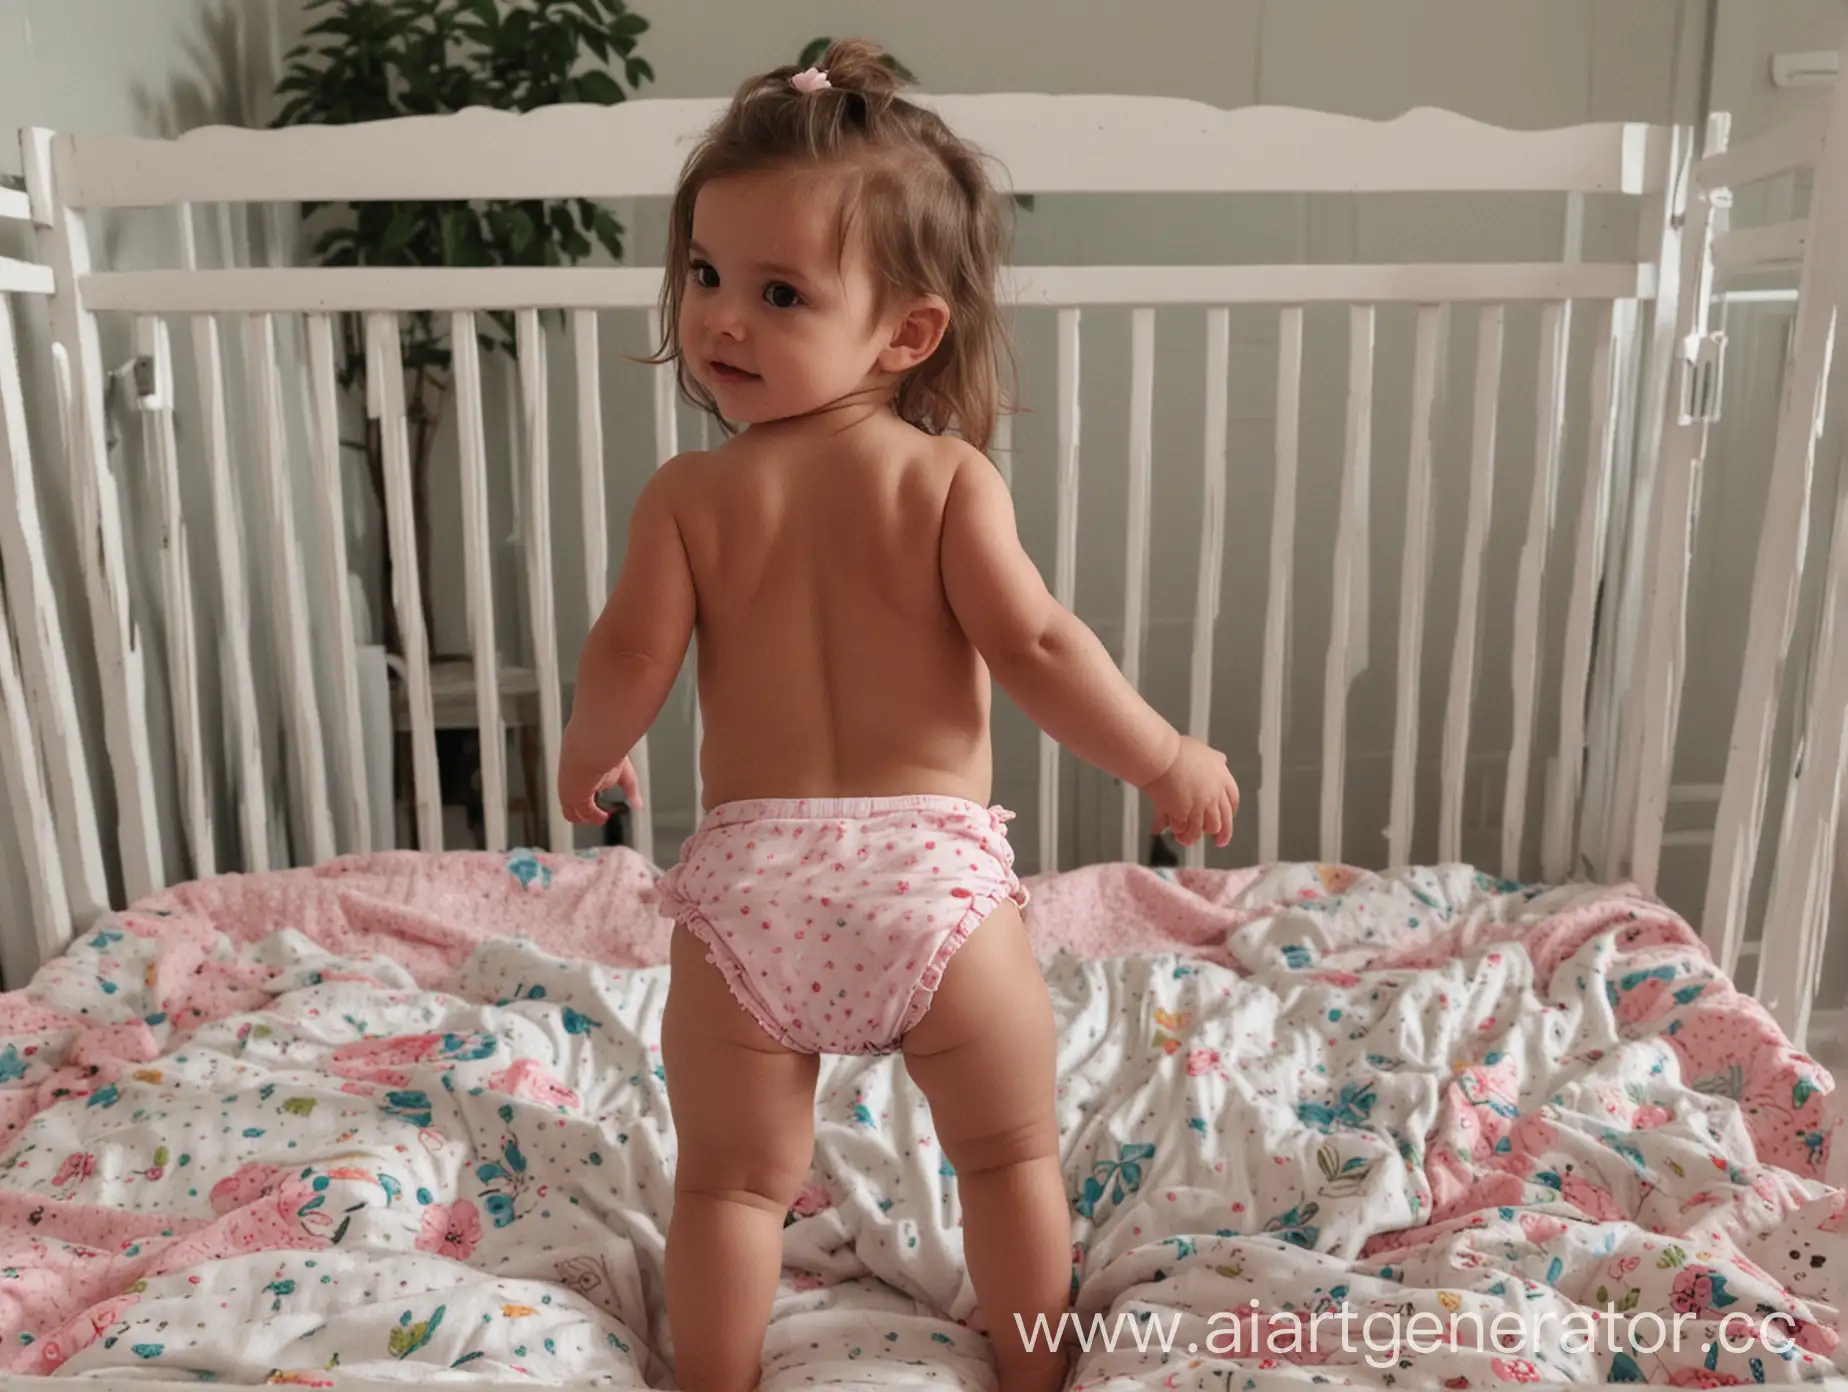 Infant-Girl-Playfully-Reveals-Her-Curiosity-from-Crib